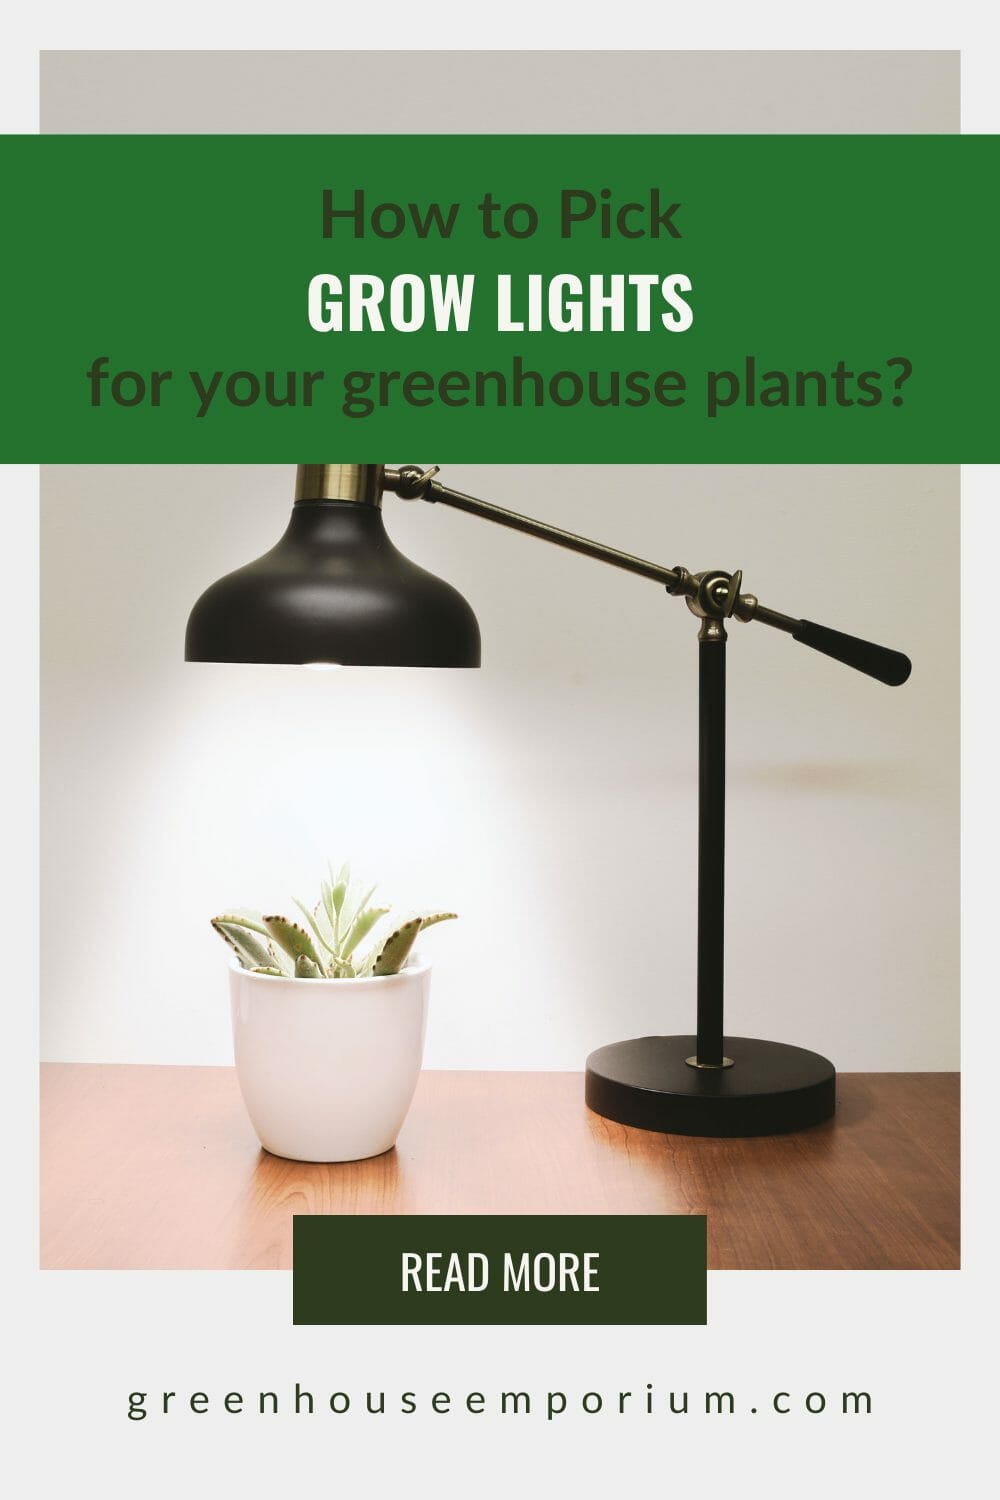 Single lamp over potted plant with text: How to Pick Grow Lights for your greenhouse plants?